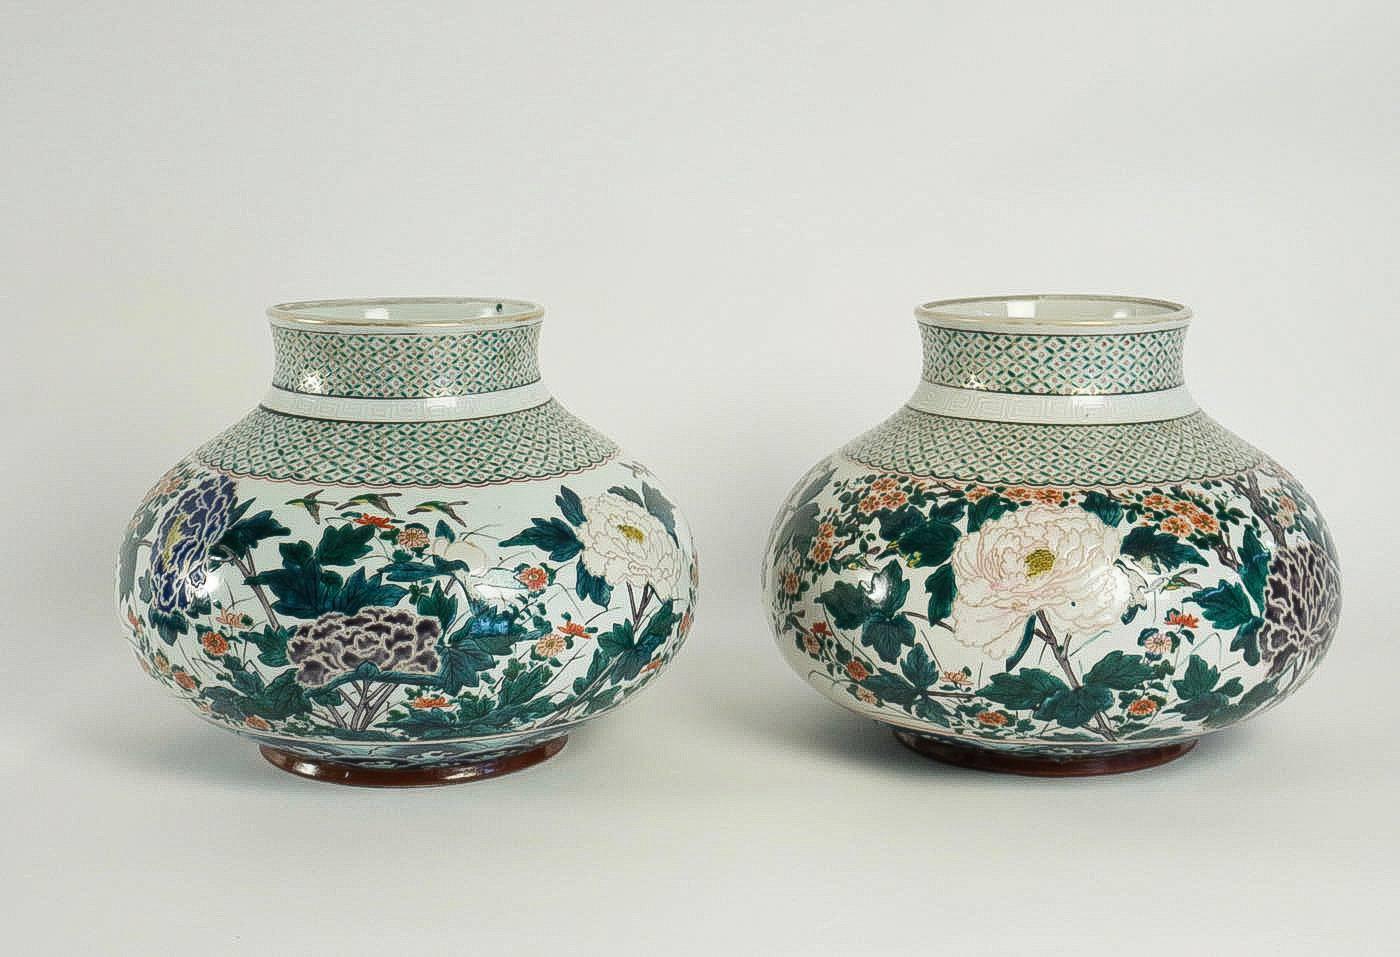 We are pleased to present you a gorgeous, decorative, interesting and rare pair of vases in Kutani ceramic decorated with birds, hydrangeas, cherry trees in flower.

Late 19th century Japan ceramic, circa 1860-1880.

Sizes: 10.23 in H, 11.81 in